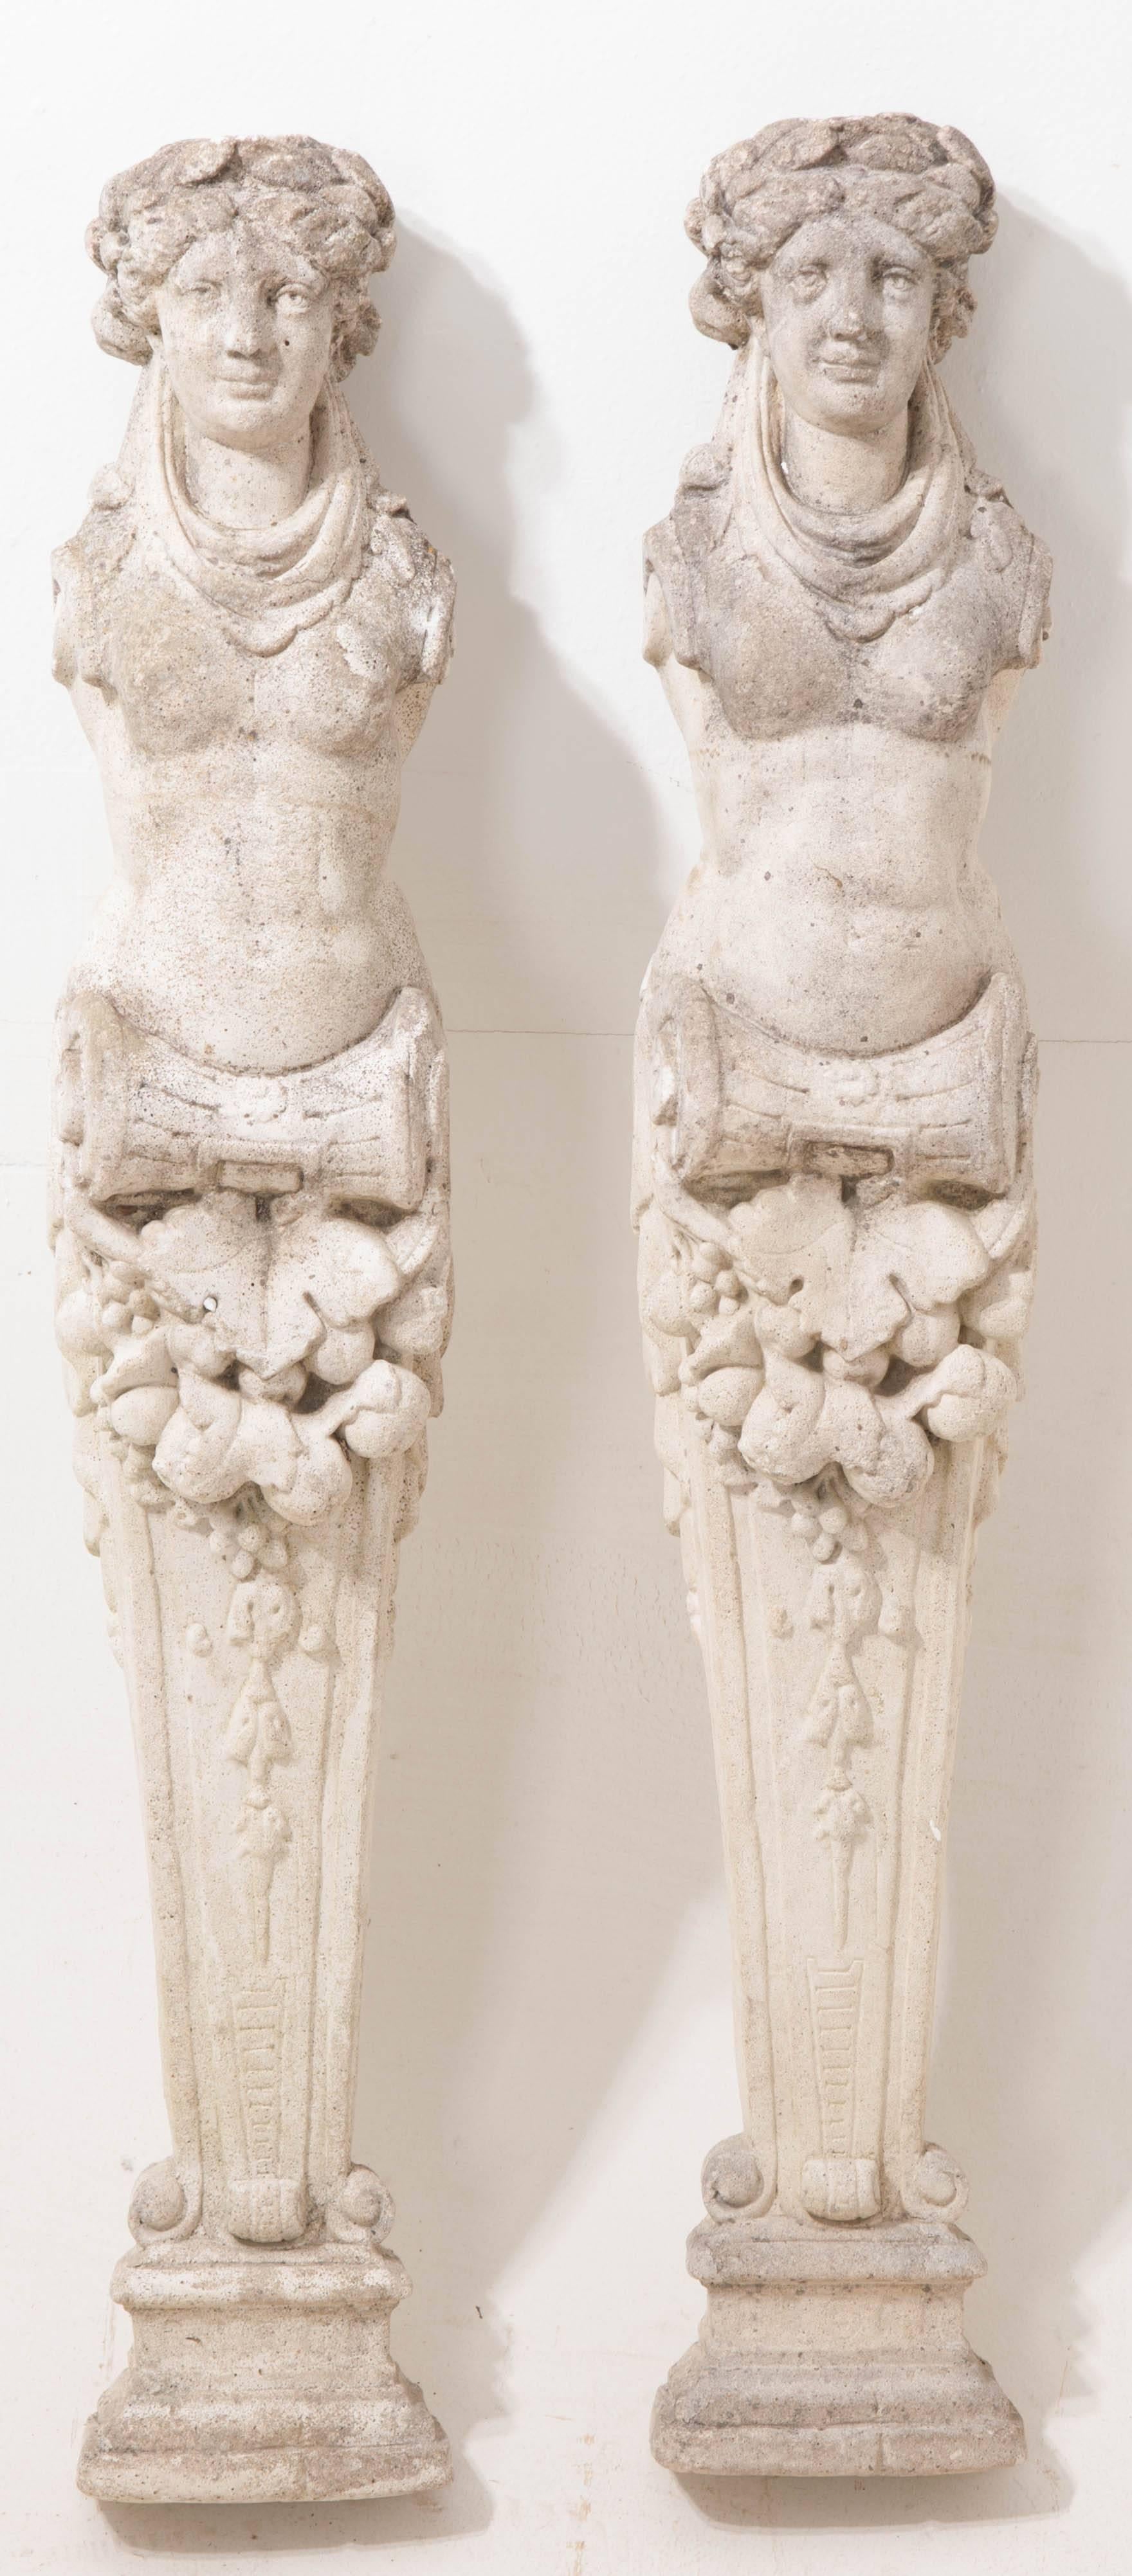 A fabulous feminine pair of reconstituted stone decorative mantel legs from 19th century, France. These ladies were originally the decorative legs, or pillars, of a complete stone fireplace mantel. Today, they make wonderful decorative objects that